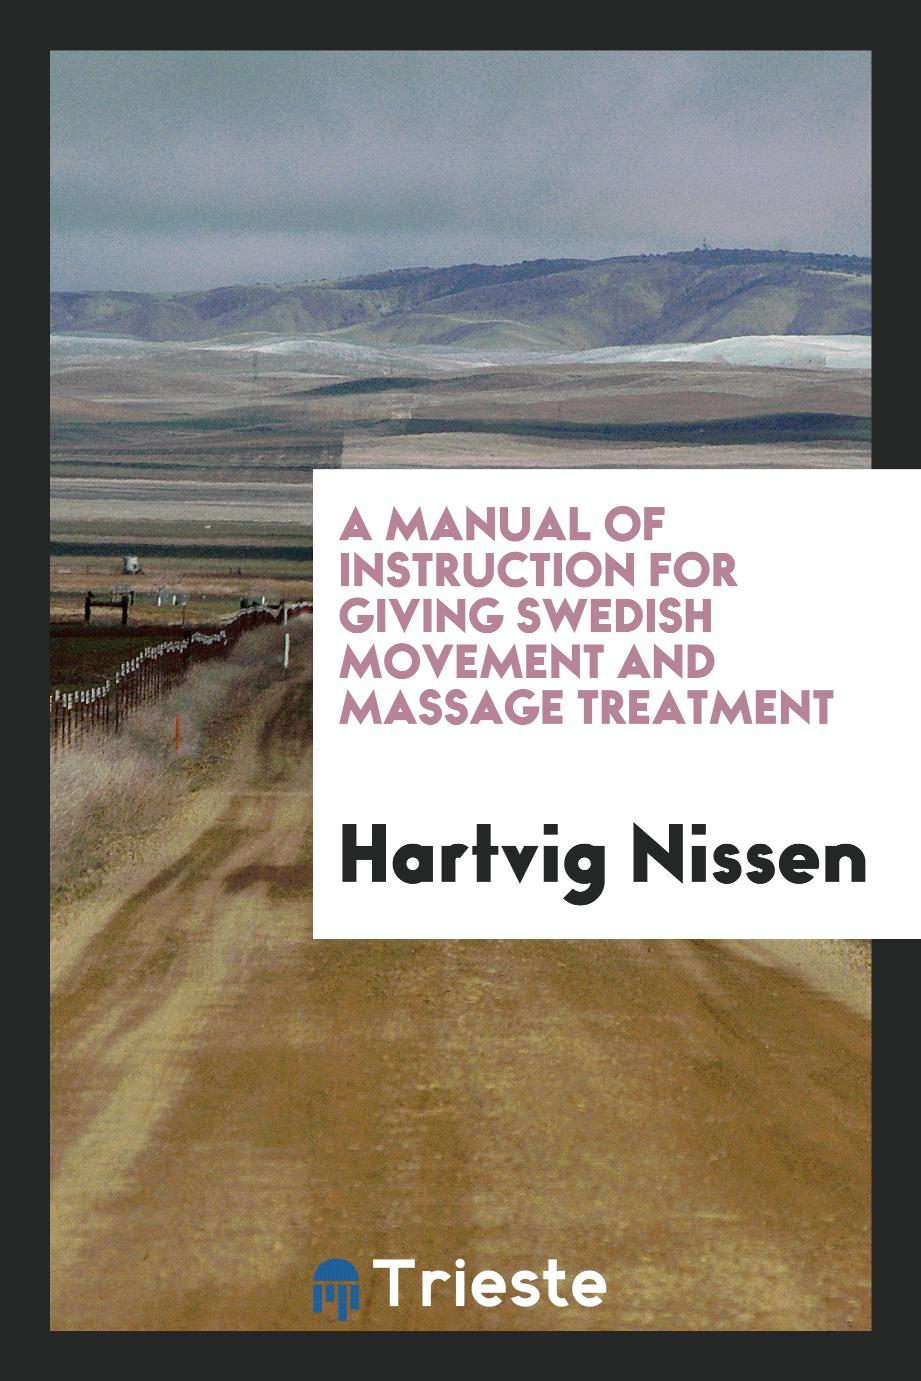 A Manual of Instruction for Giving Swedish Movement and Massage Treatment